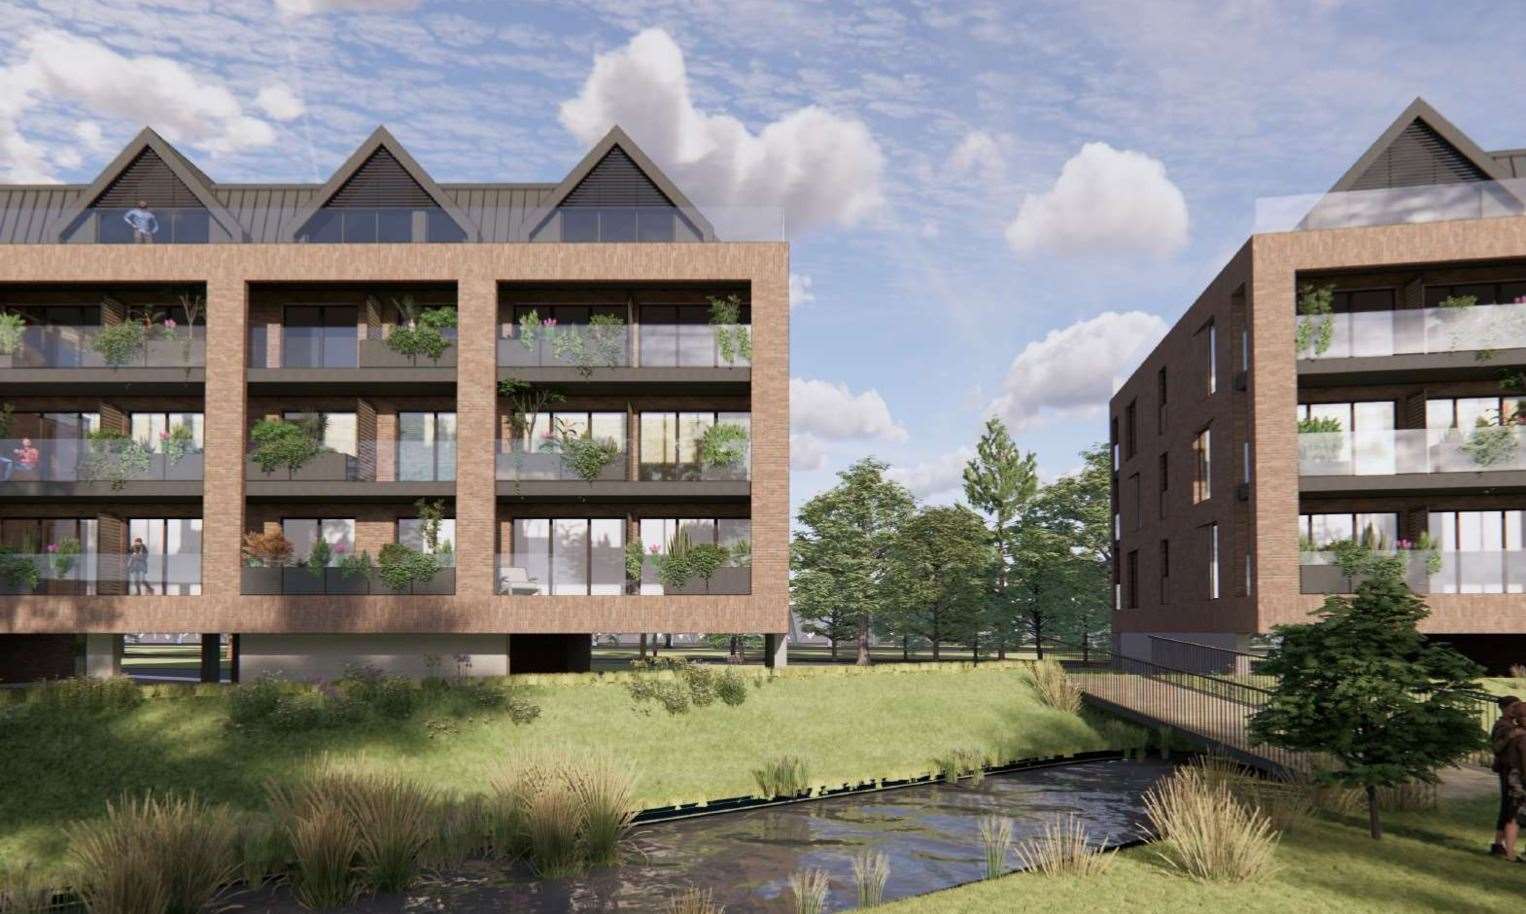 Each building would be four-and-a-half storeys high. Picture: Quinn Estates/Hollaway